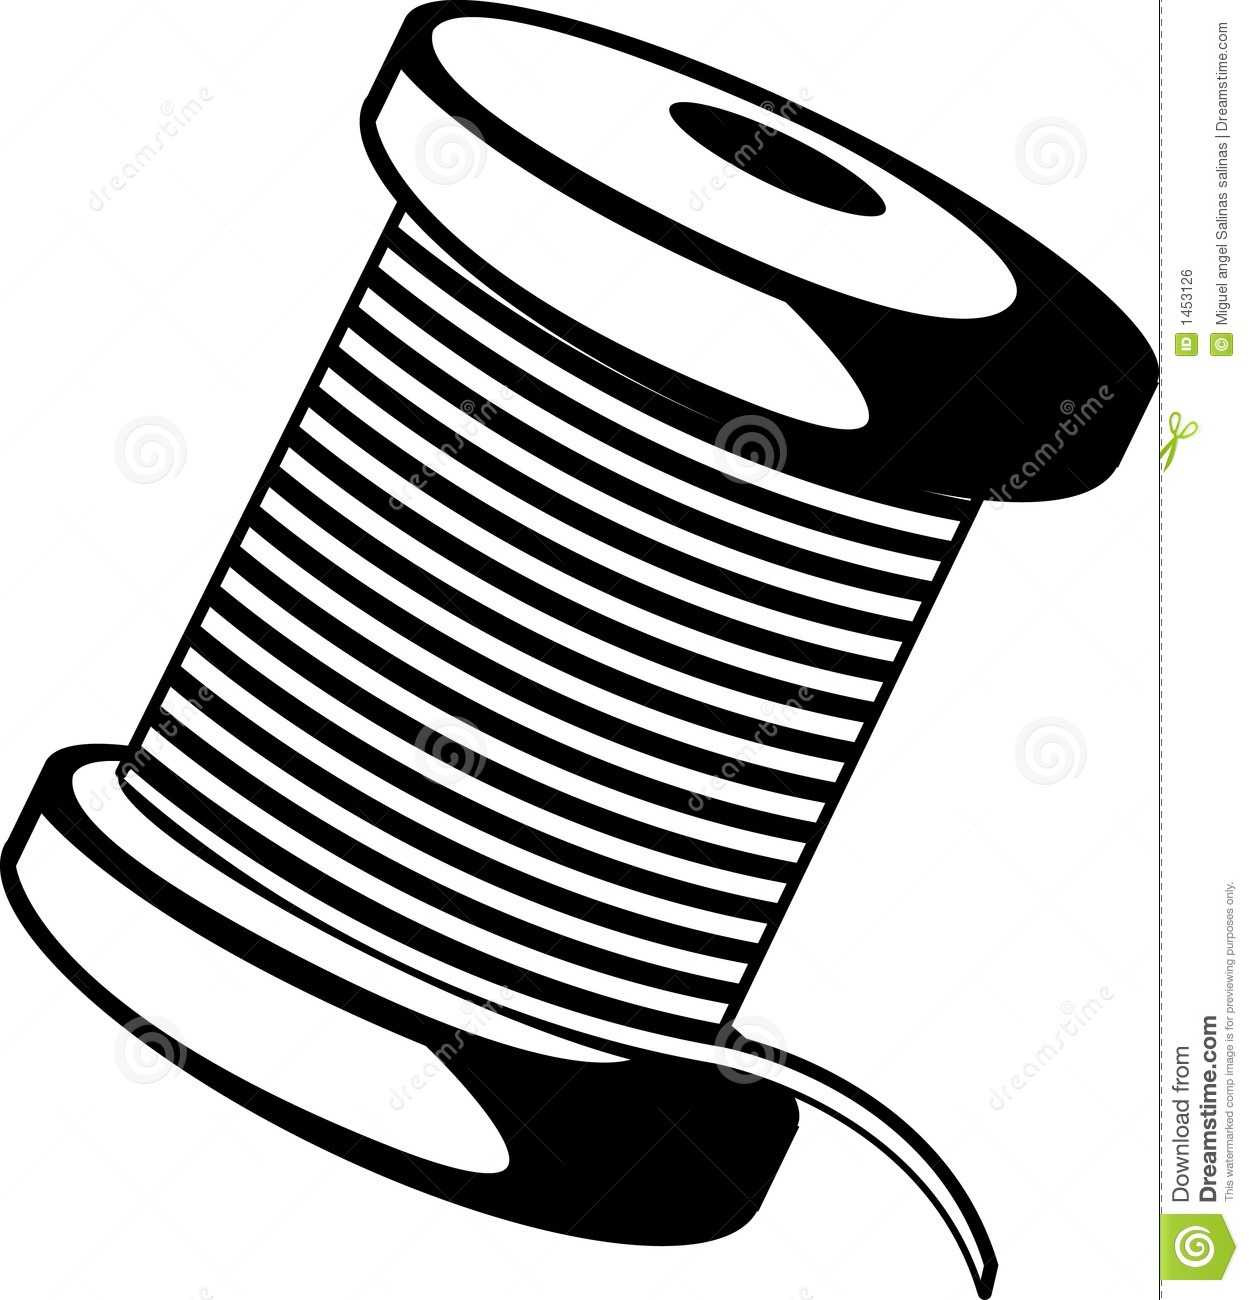 Cable Reel Stock Illustrations.